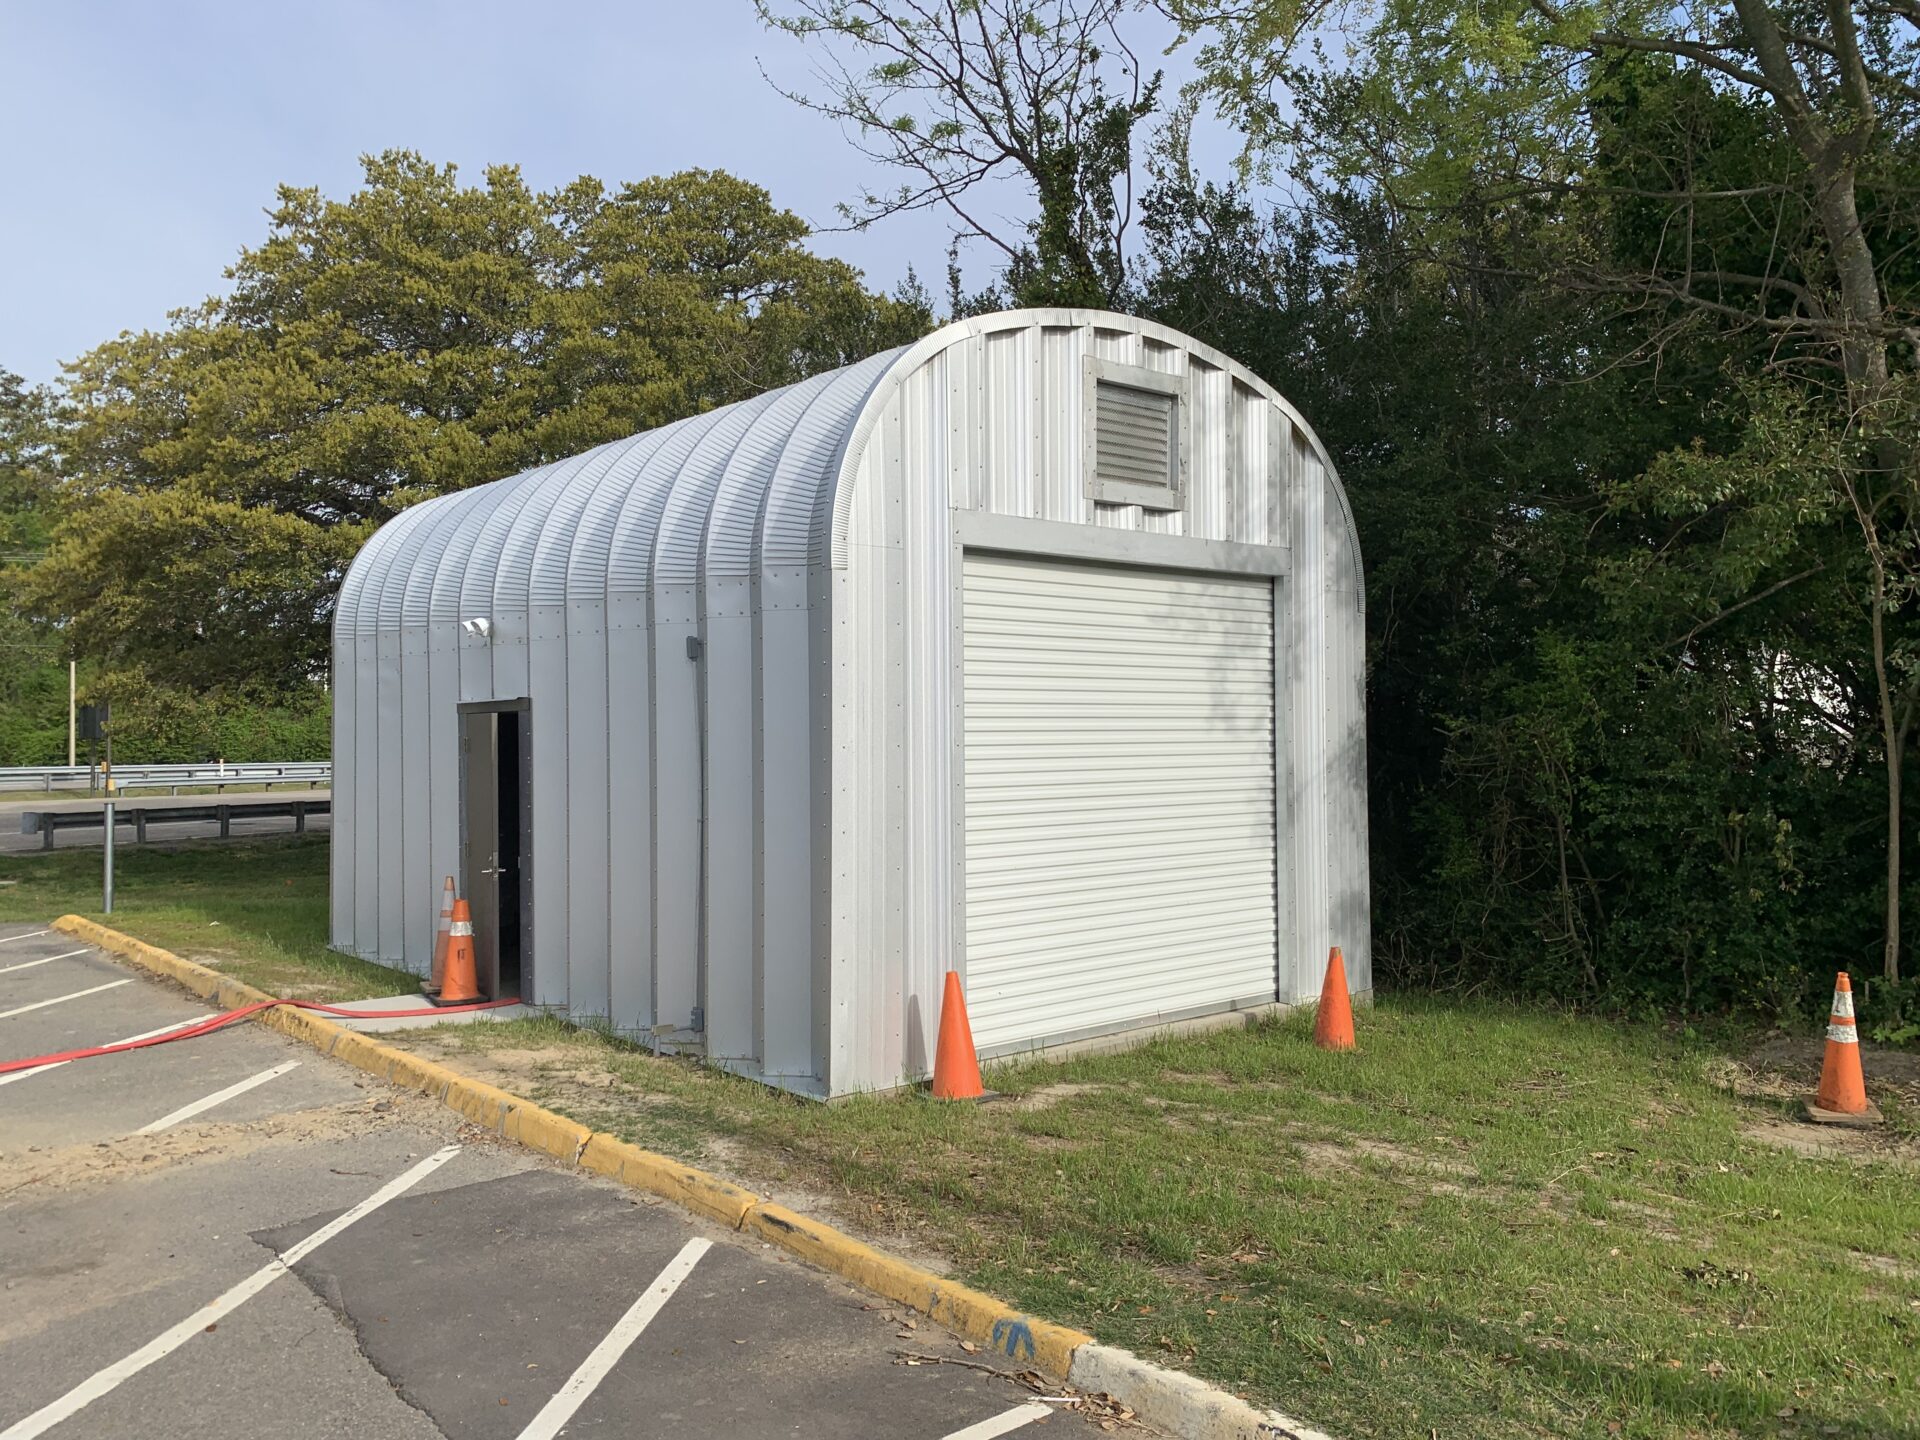 S-Model Quonset hut with man door on the side, five traffic cones, and a yellow-painted curb.